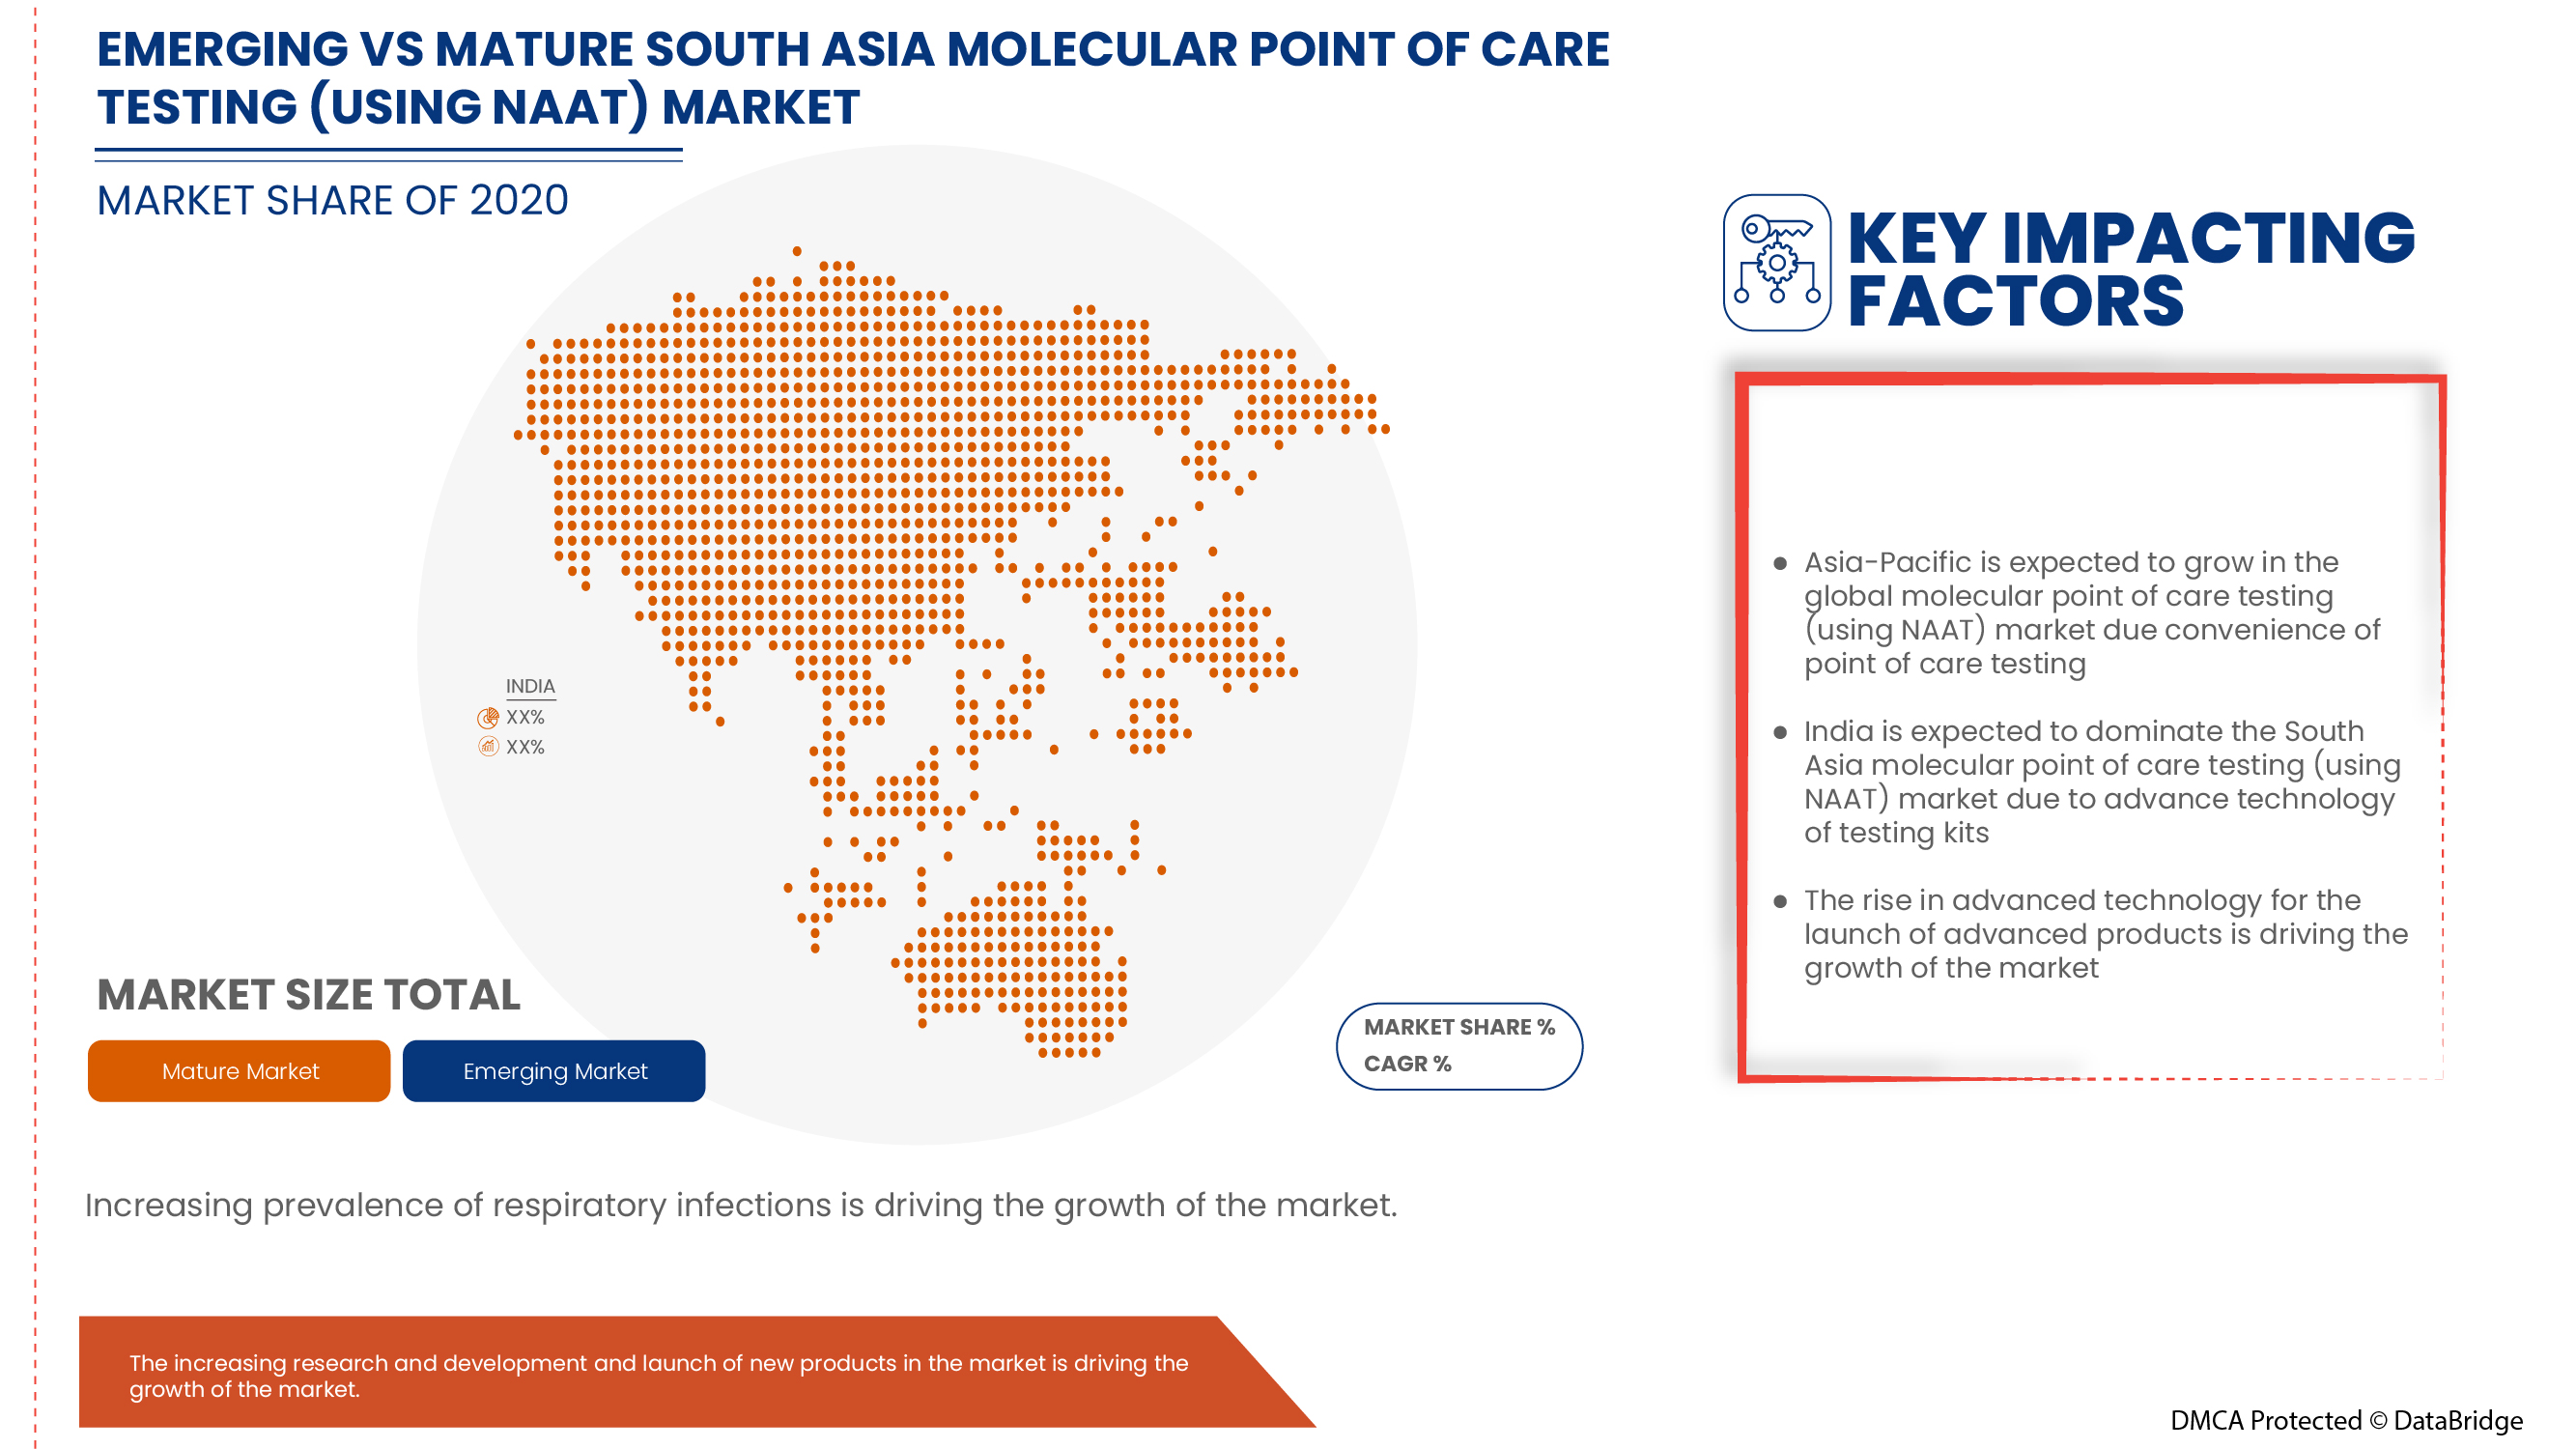 South Asia Molecular Point of Care Testing (using NAAT) Market